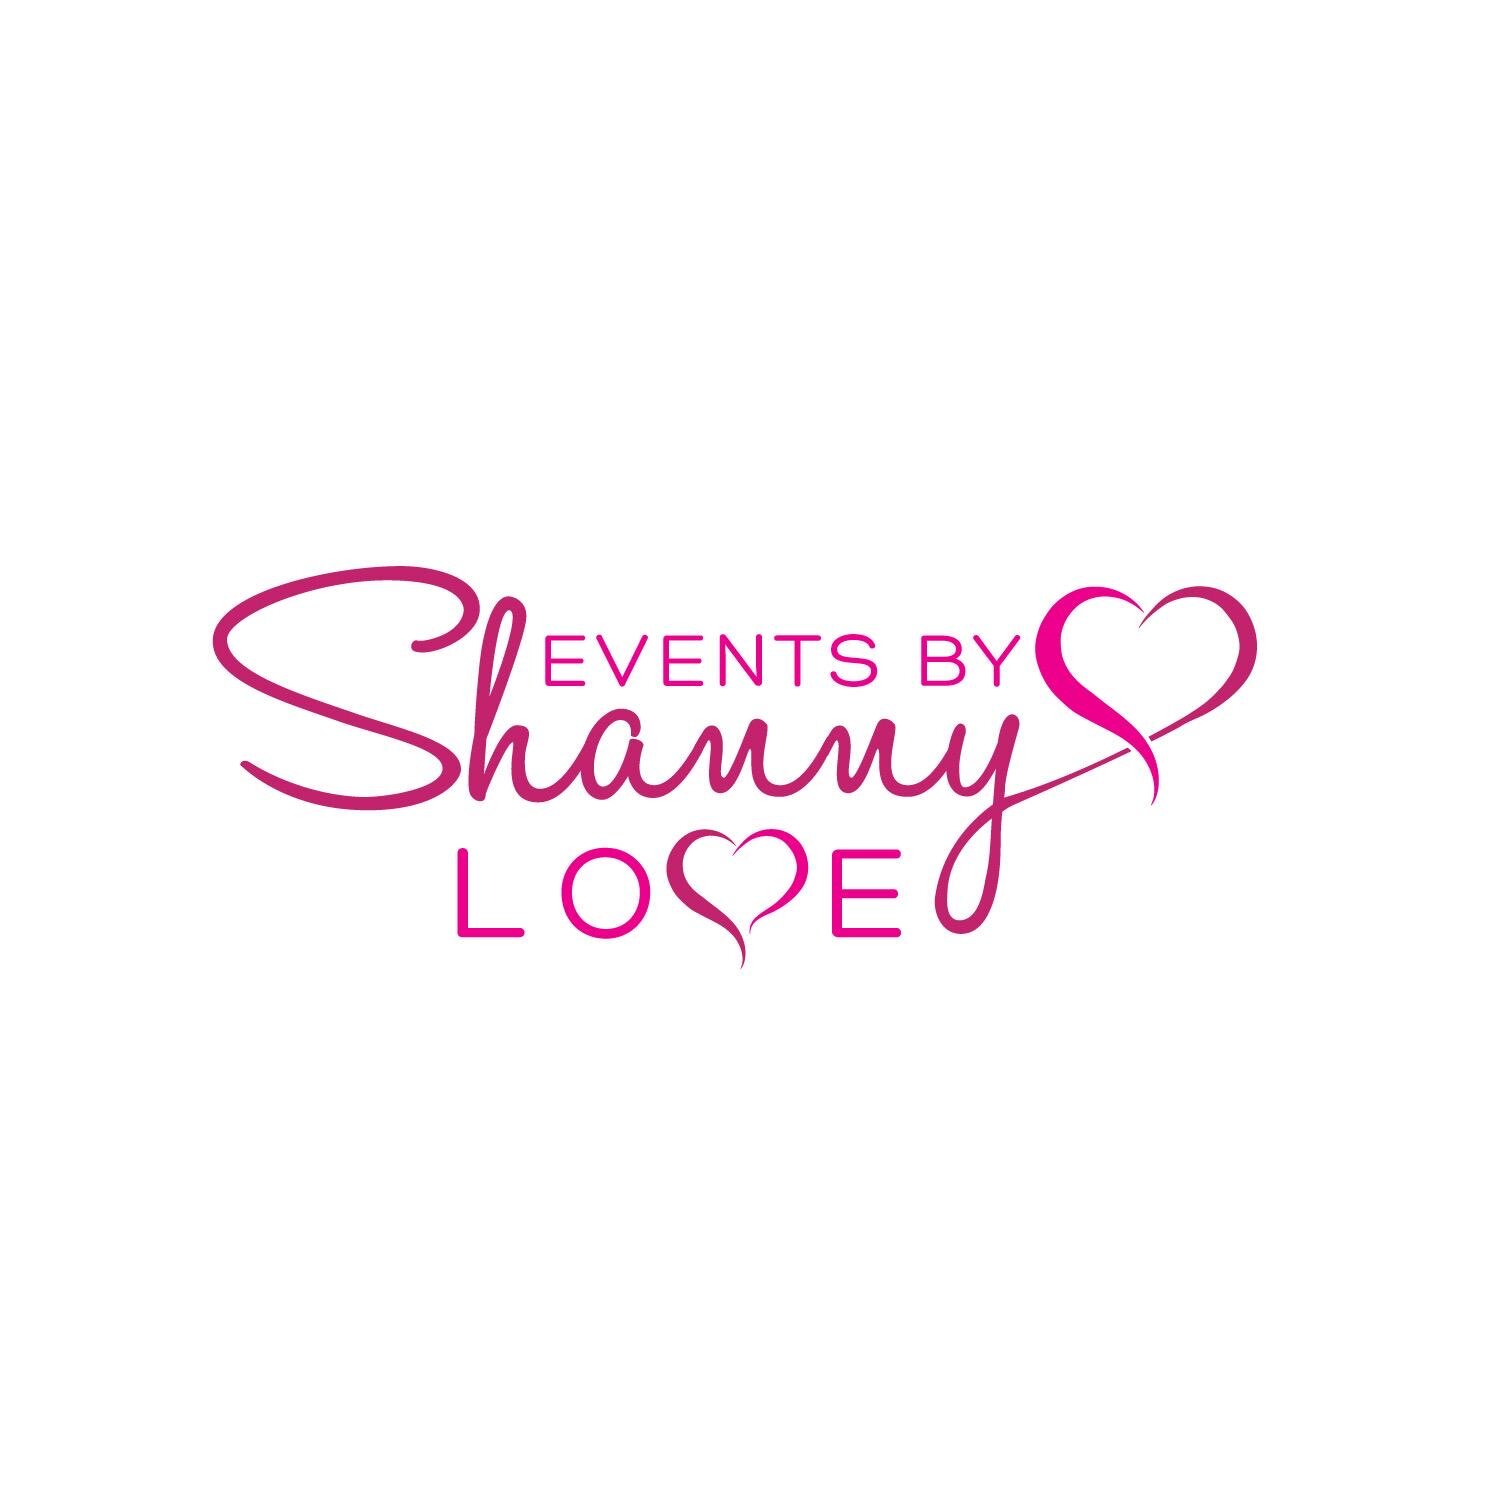 Events by Shanny Love logo.JPG